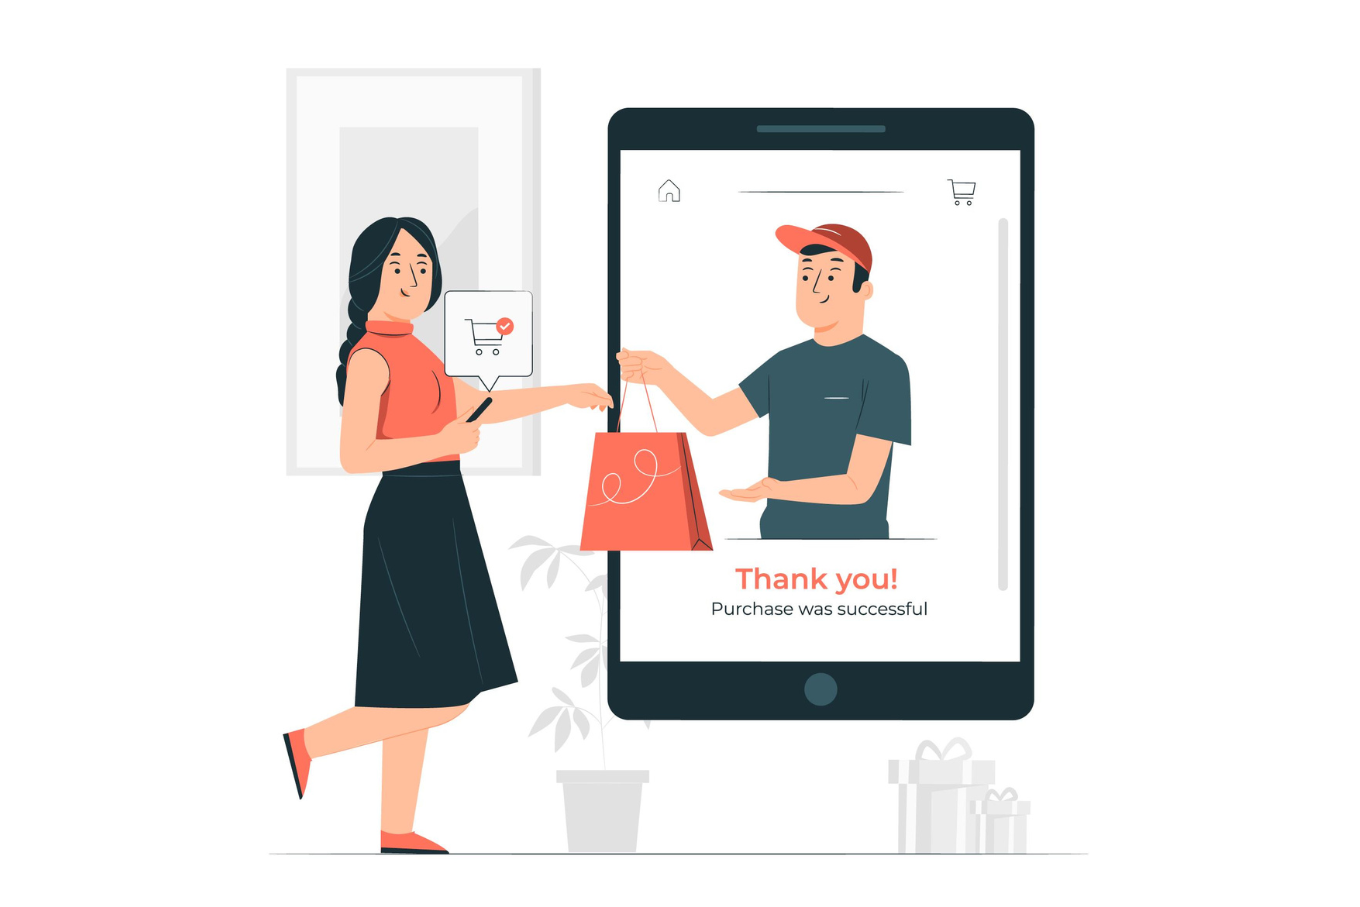 A woman receiving a shopping bag from a man on a smartphone screen, The screen displays the message: "Thank you! Purchase was successful